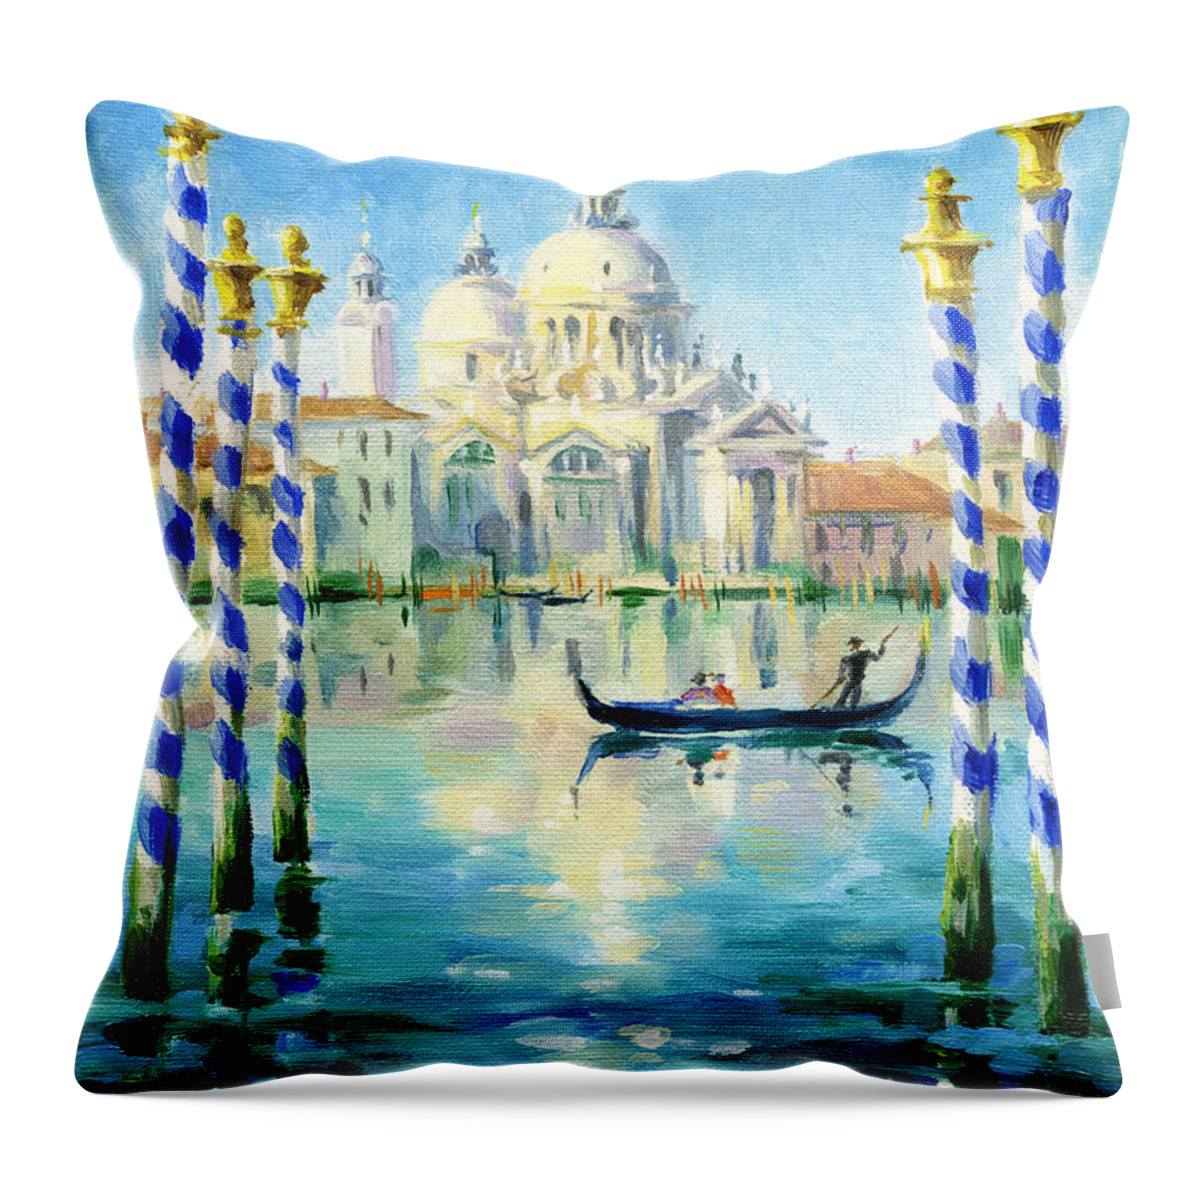 Oil Painting Throw Pillow featuring the painting Santa Maria Della Salute by Maria Rabinky